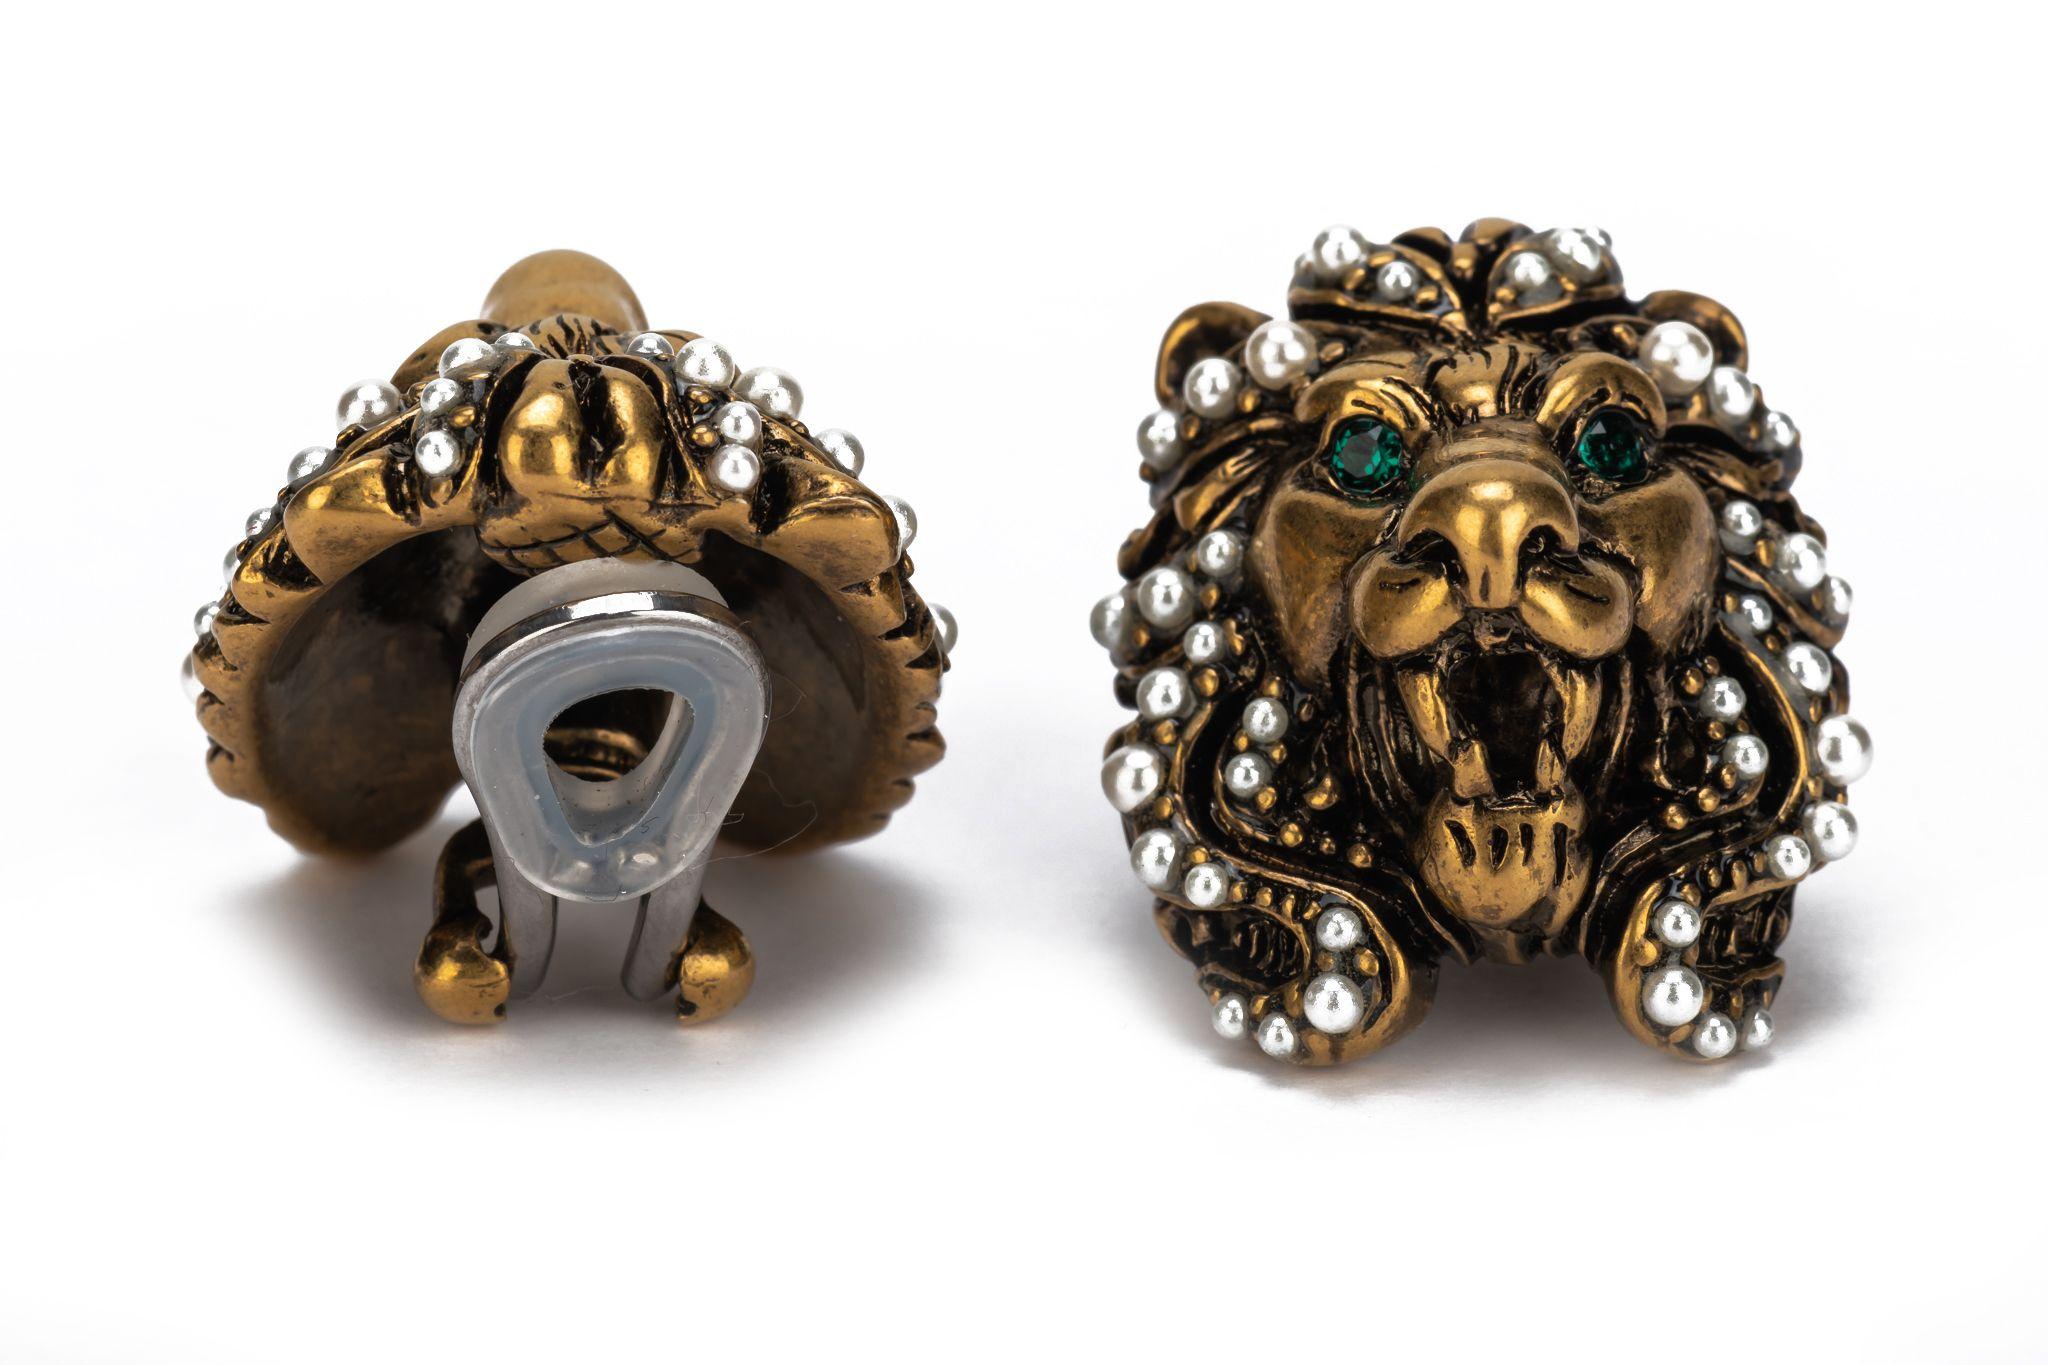 Gucci new lionshead clip earrings in brass, pearls and green eyes. Come with original dust cover and box.